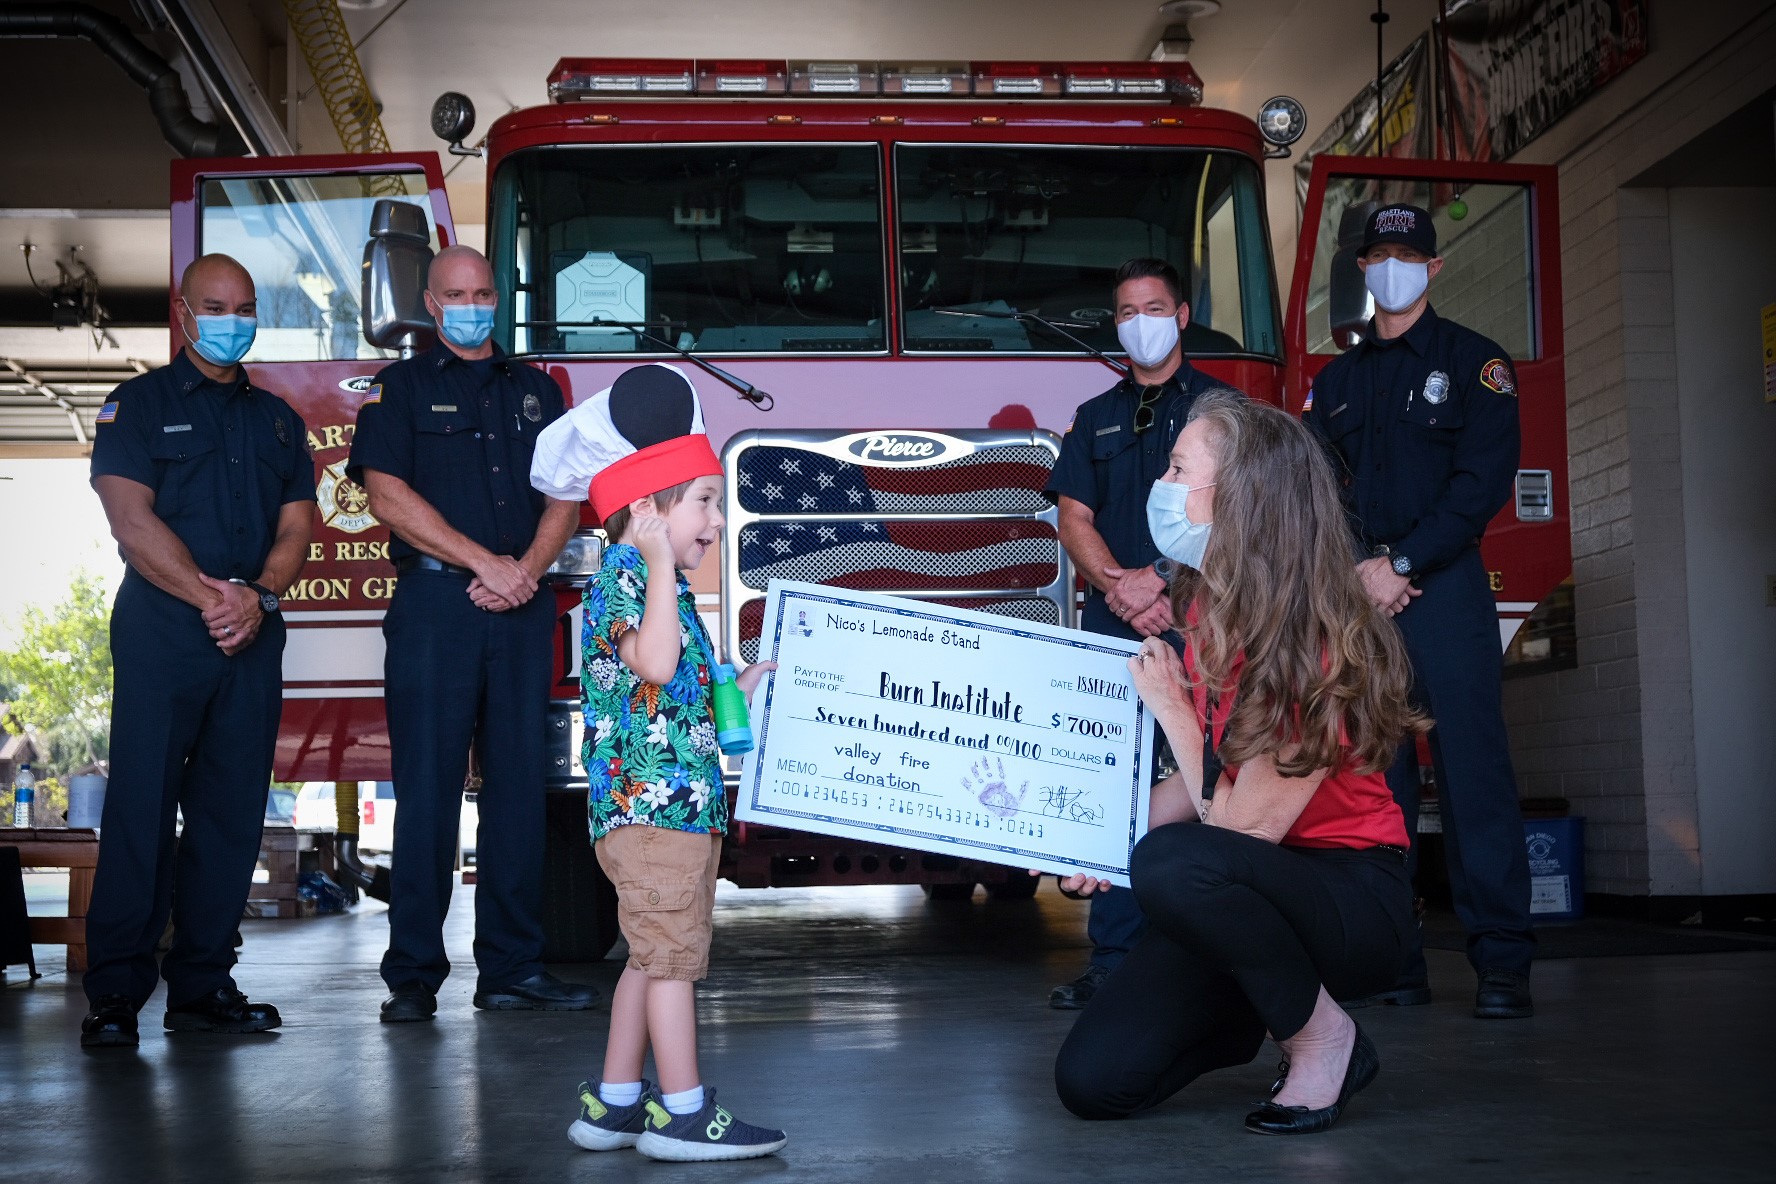 3-year-old sought to raise $7 for Valley Fire victims. He raised $700